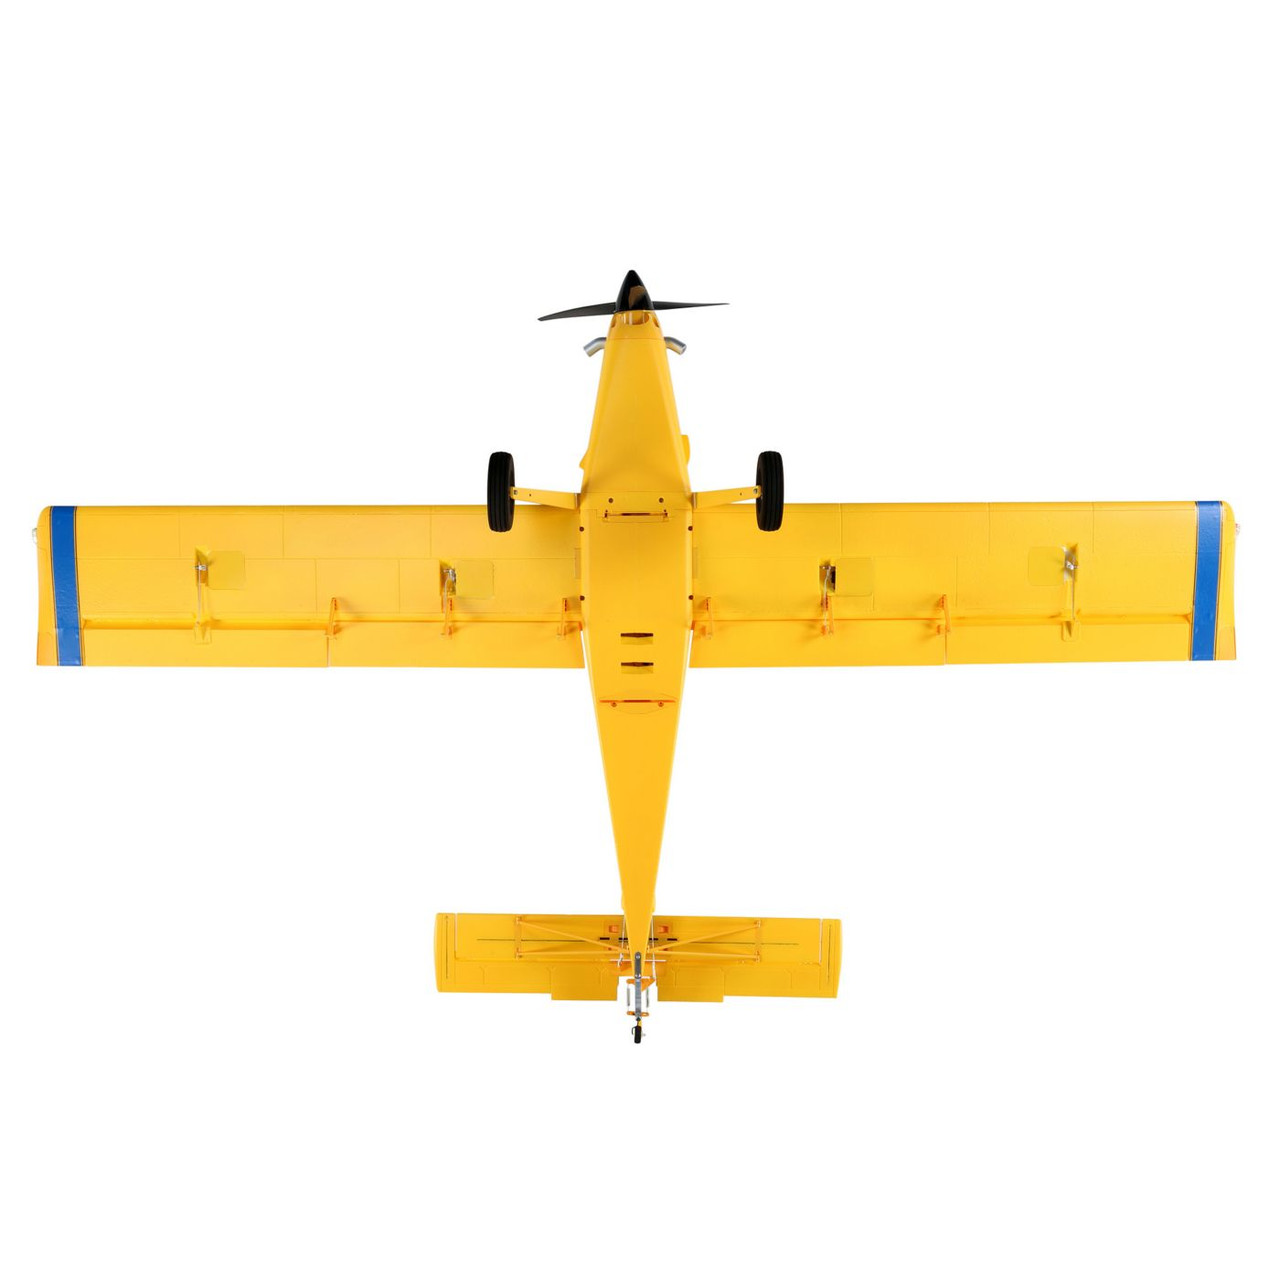 E-flite Air Tractor 1.5m BNF Electric Airplane (1555mm) w/AS3X & SAFE Select